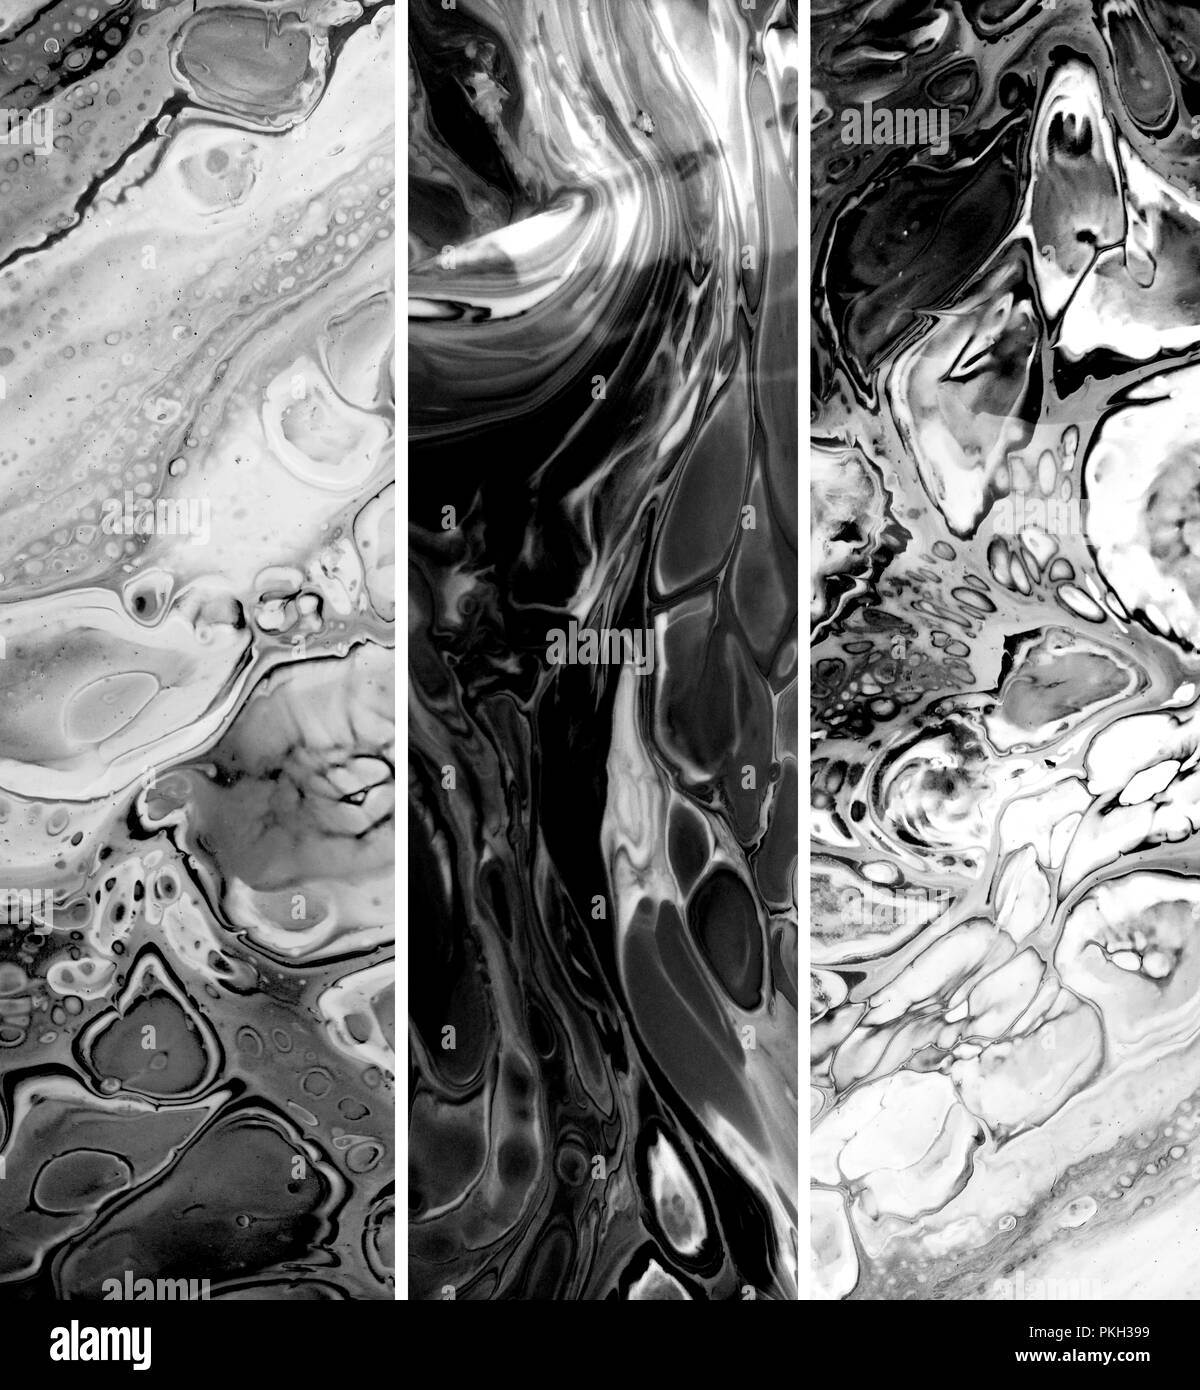 Liquid marbling black paint vertical textures collection. Grunge acrylic fluid stains. Monochrome paint brushstrokes and streaks. Marble background. Gouache diffusion poster design. Black raster Stock Photo